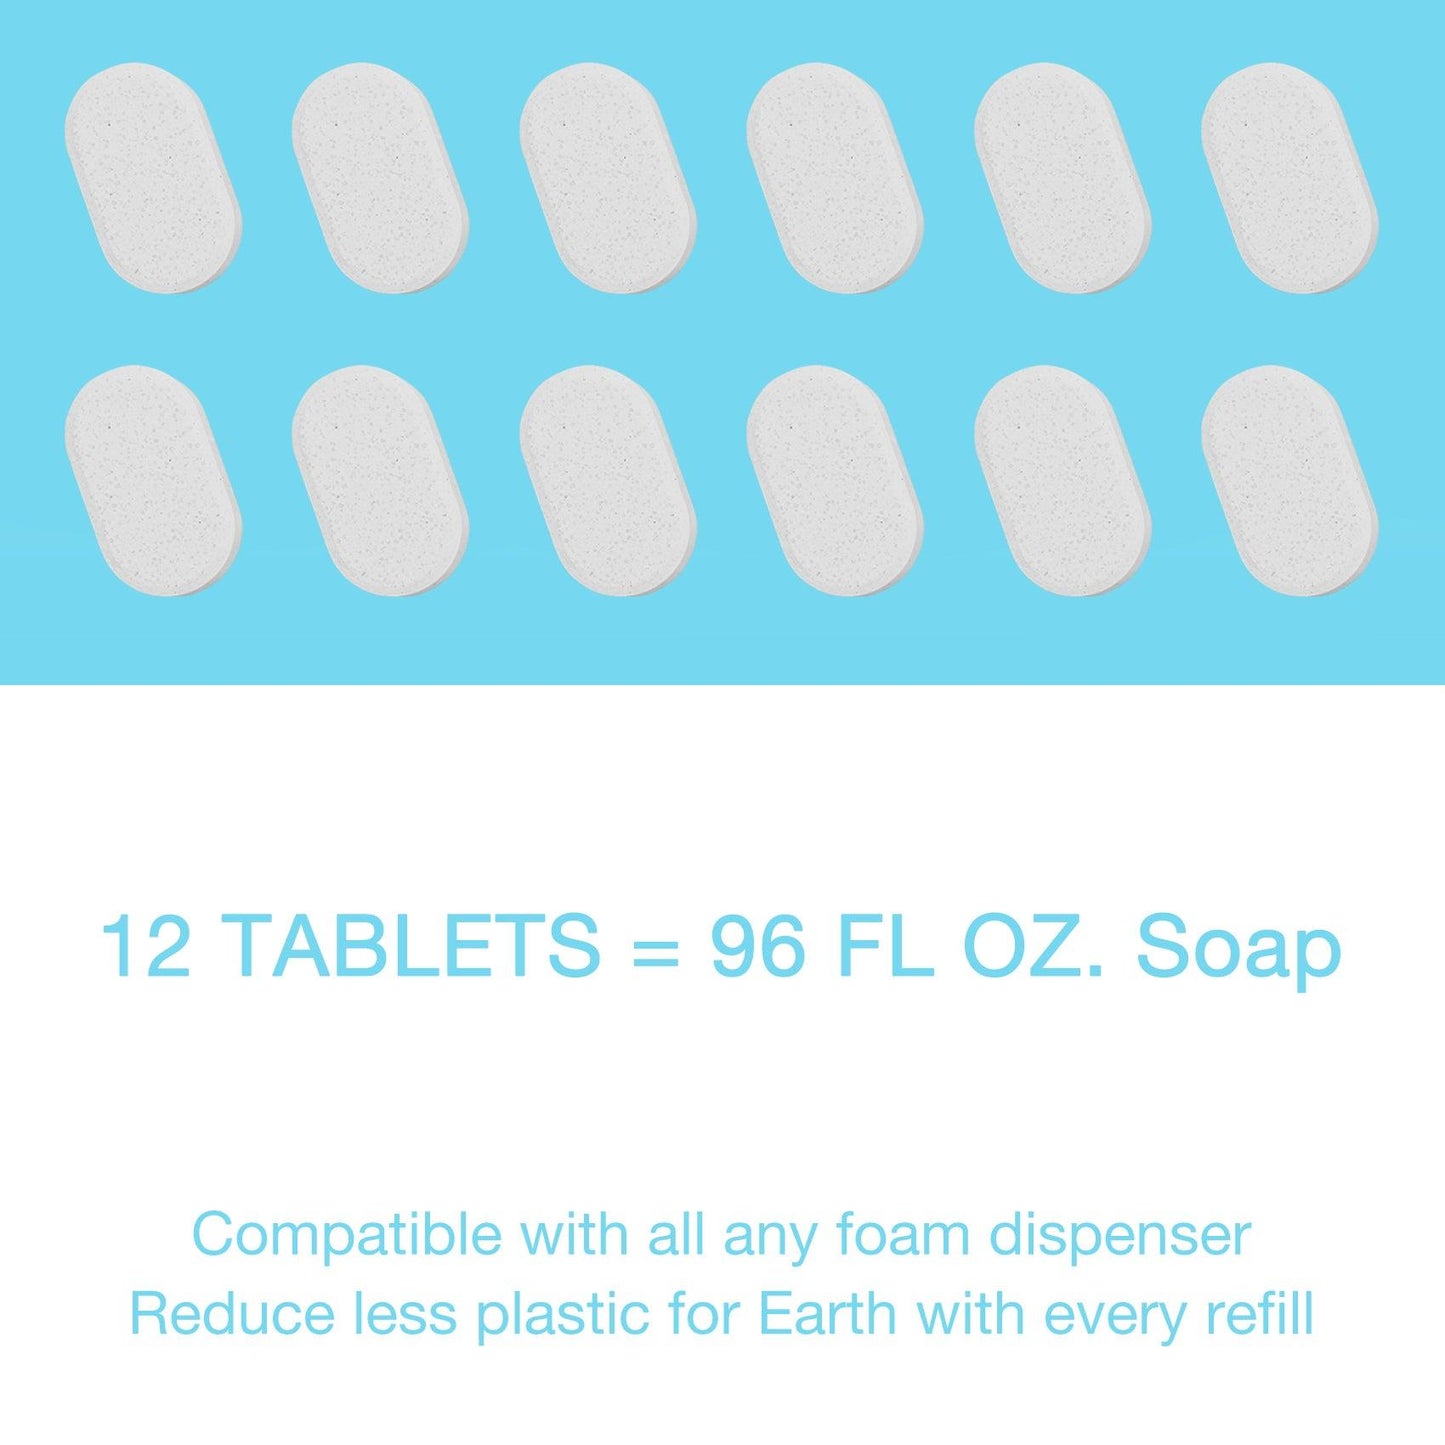 Foaming Hand Soap Refill 12 Tablets - Unscented - Flowcheer